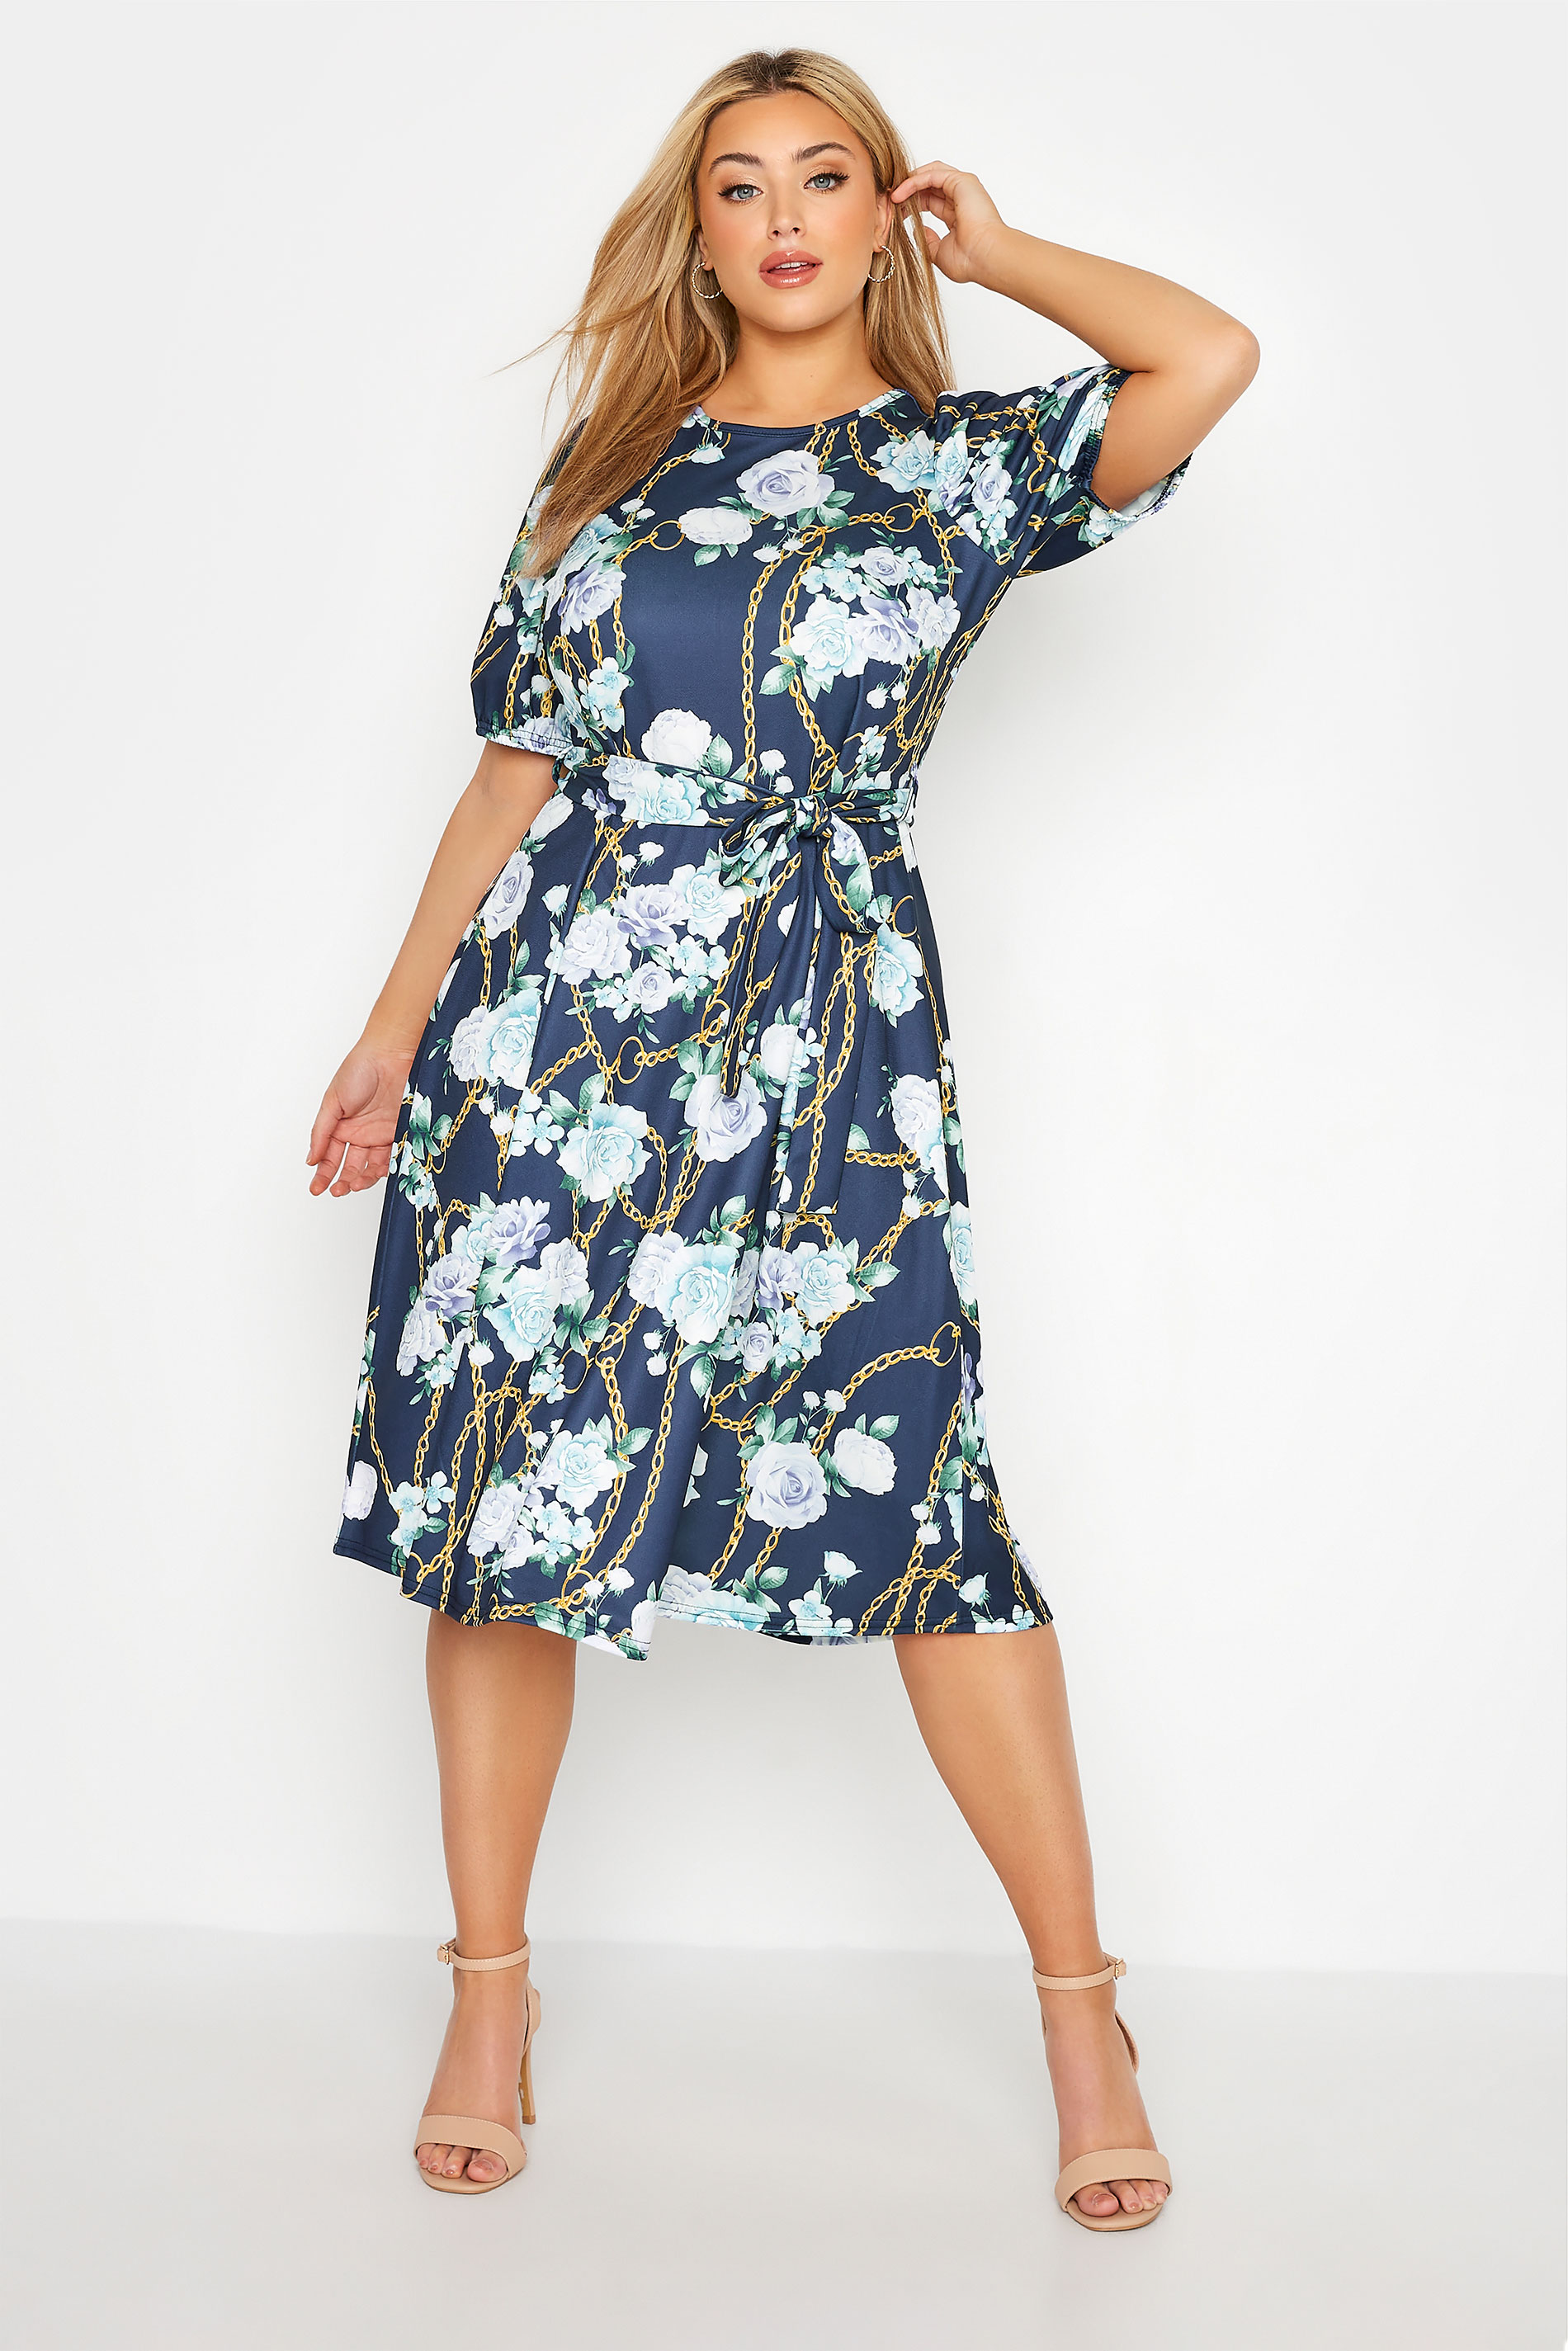 Robes Grande Taille Grande taille  Robes Patineuses | YOURS LONDON - Robe Bleue Floral Manches Bouffantes - EI27355